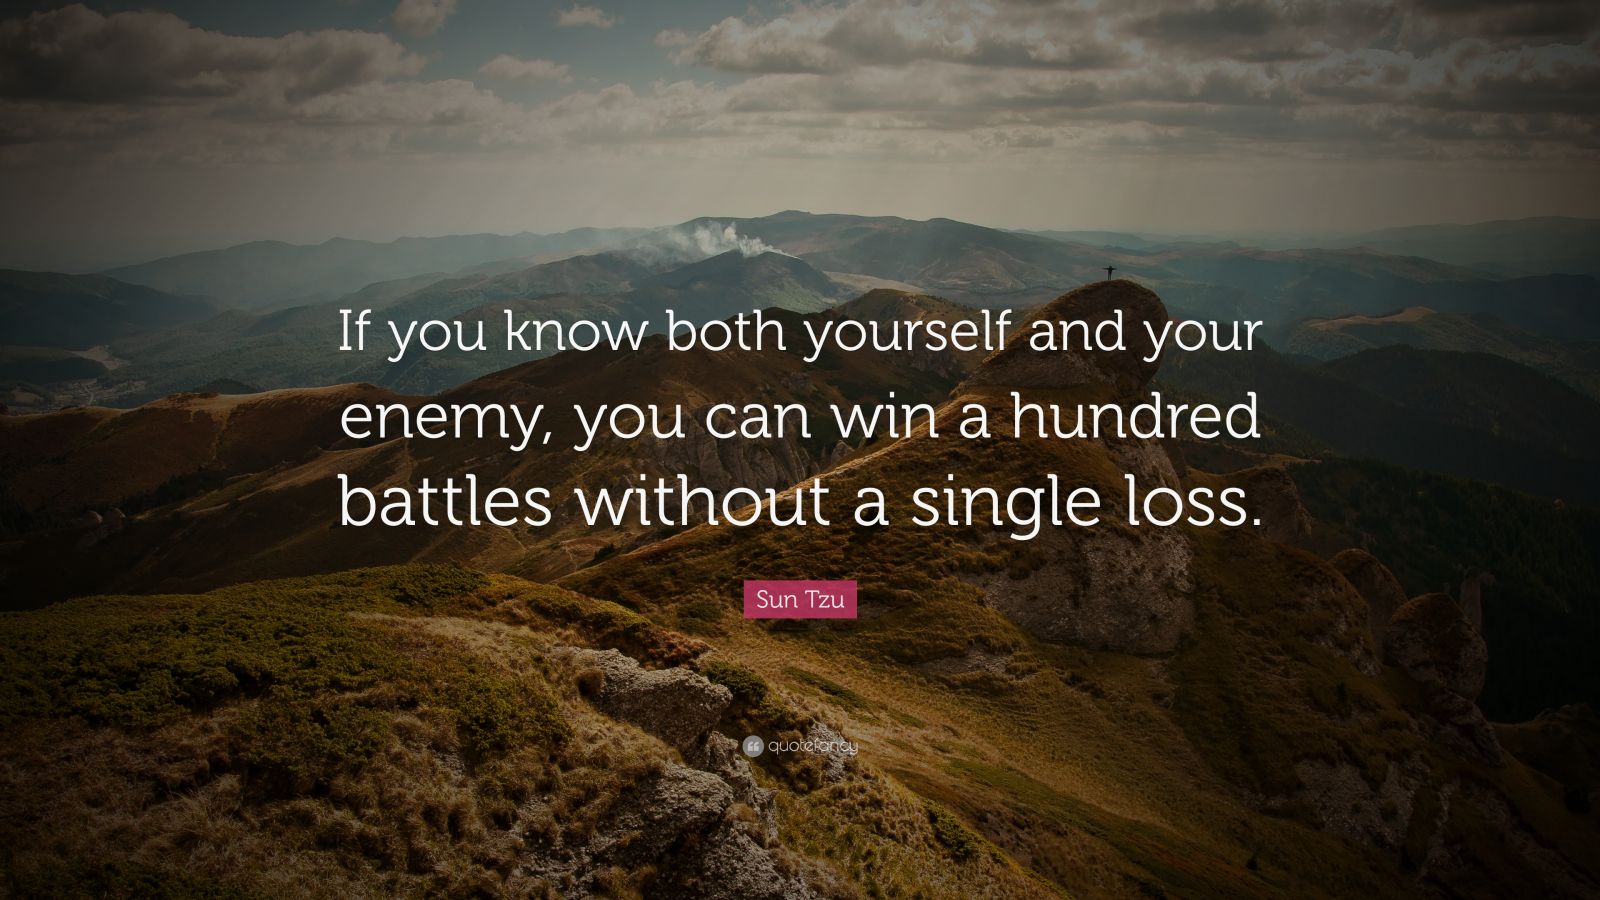 Sun Tzu Quote: “If you know both yourself and your enemy, you can win a